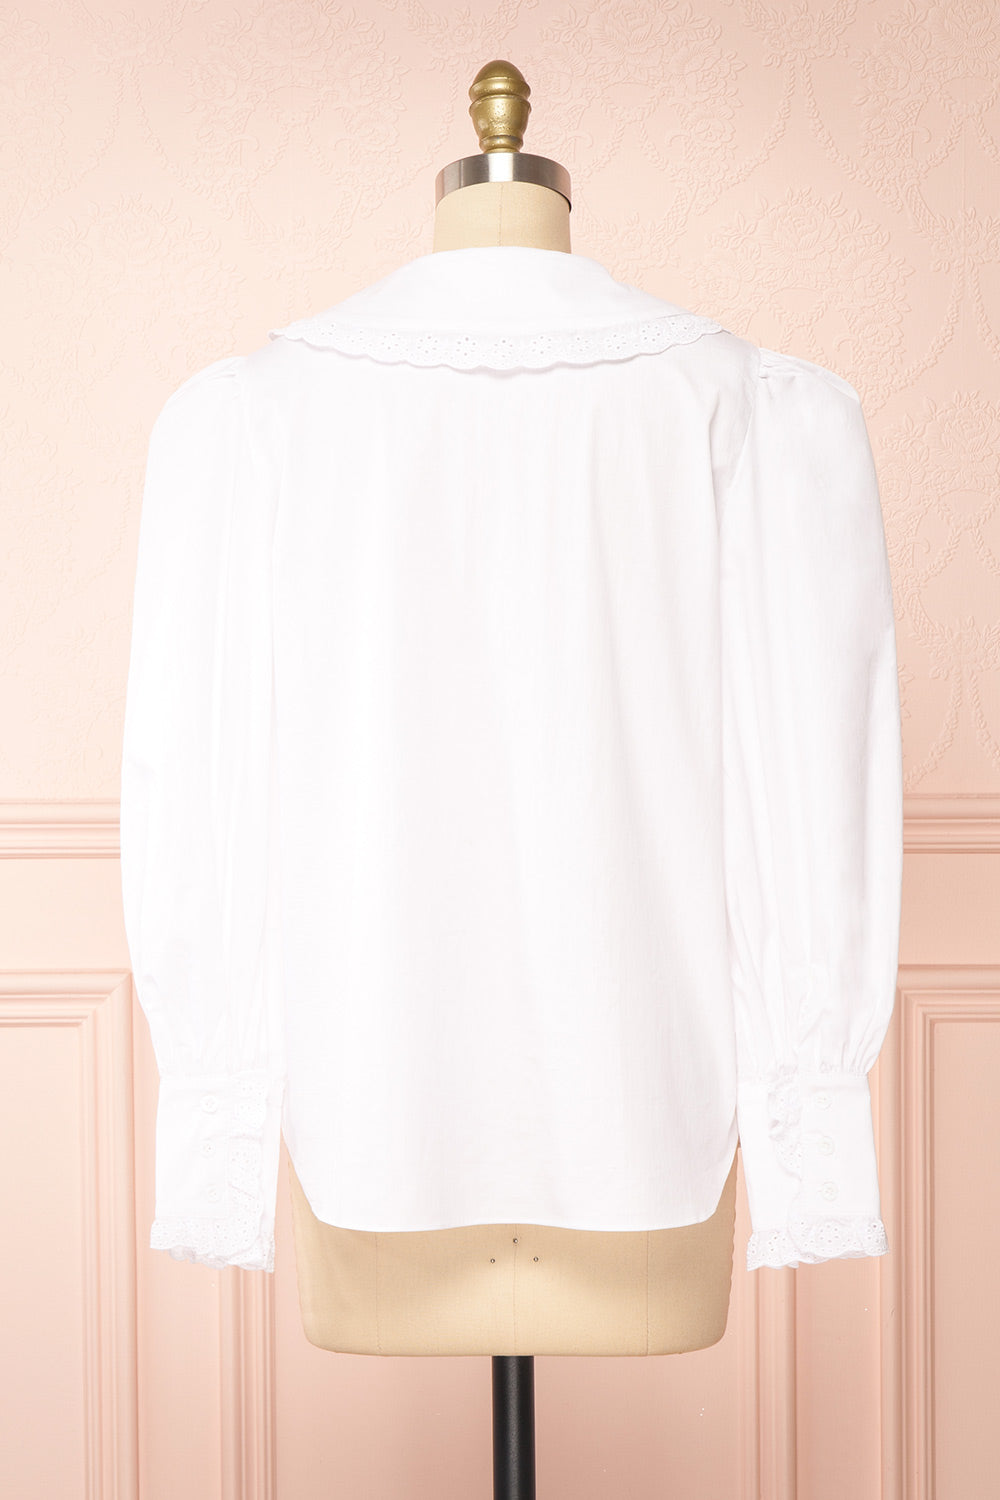 Cesile White Blouse w/ Embroidered Peter-Pan Collar | Boutique 1861